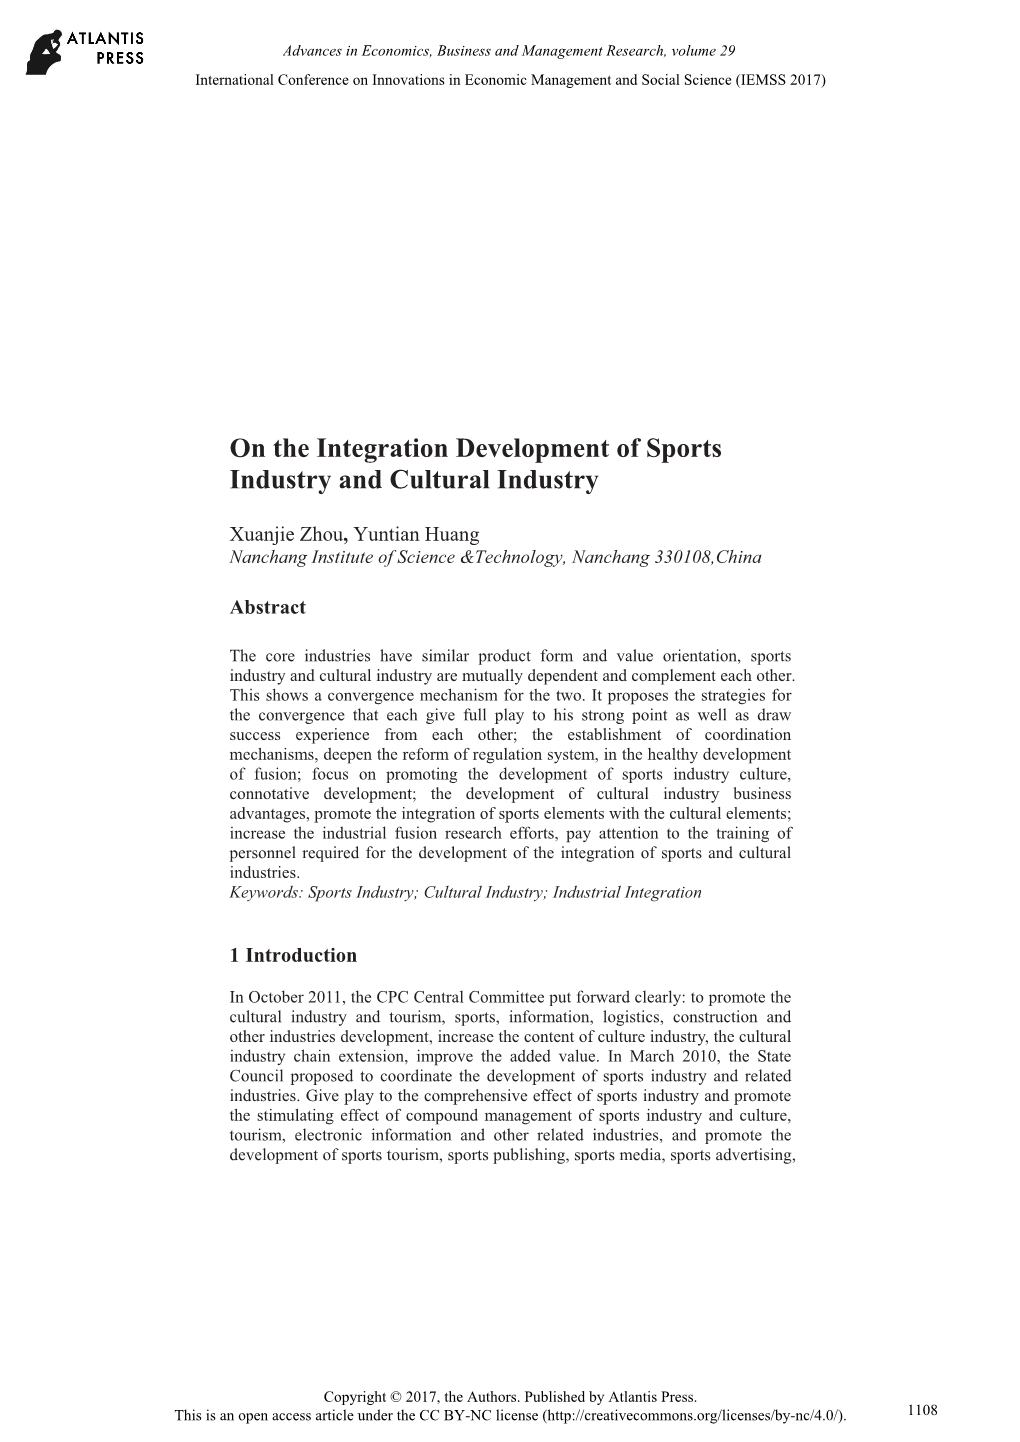 On the Integration Development of Sports Industry and Cultural Industry